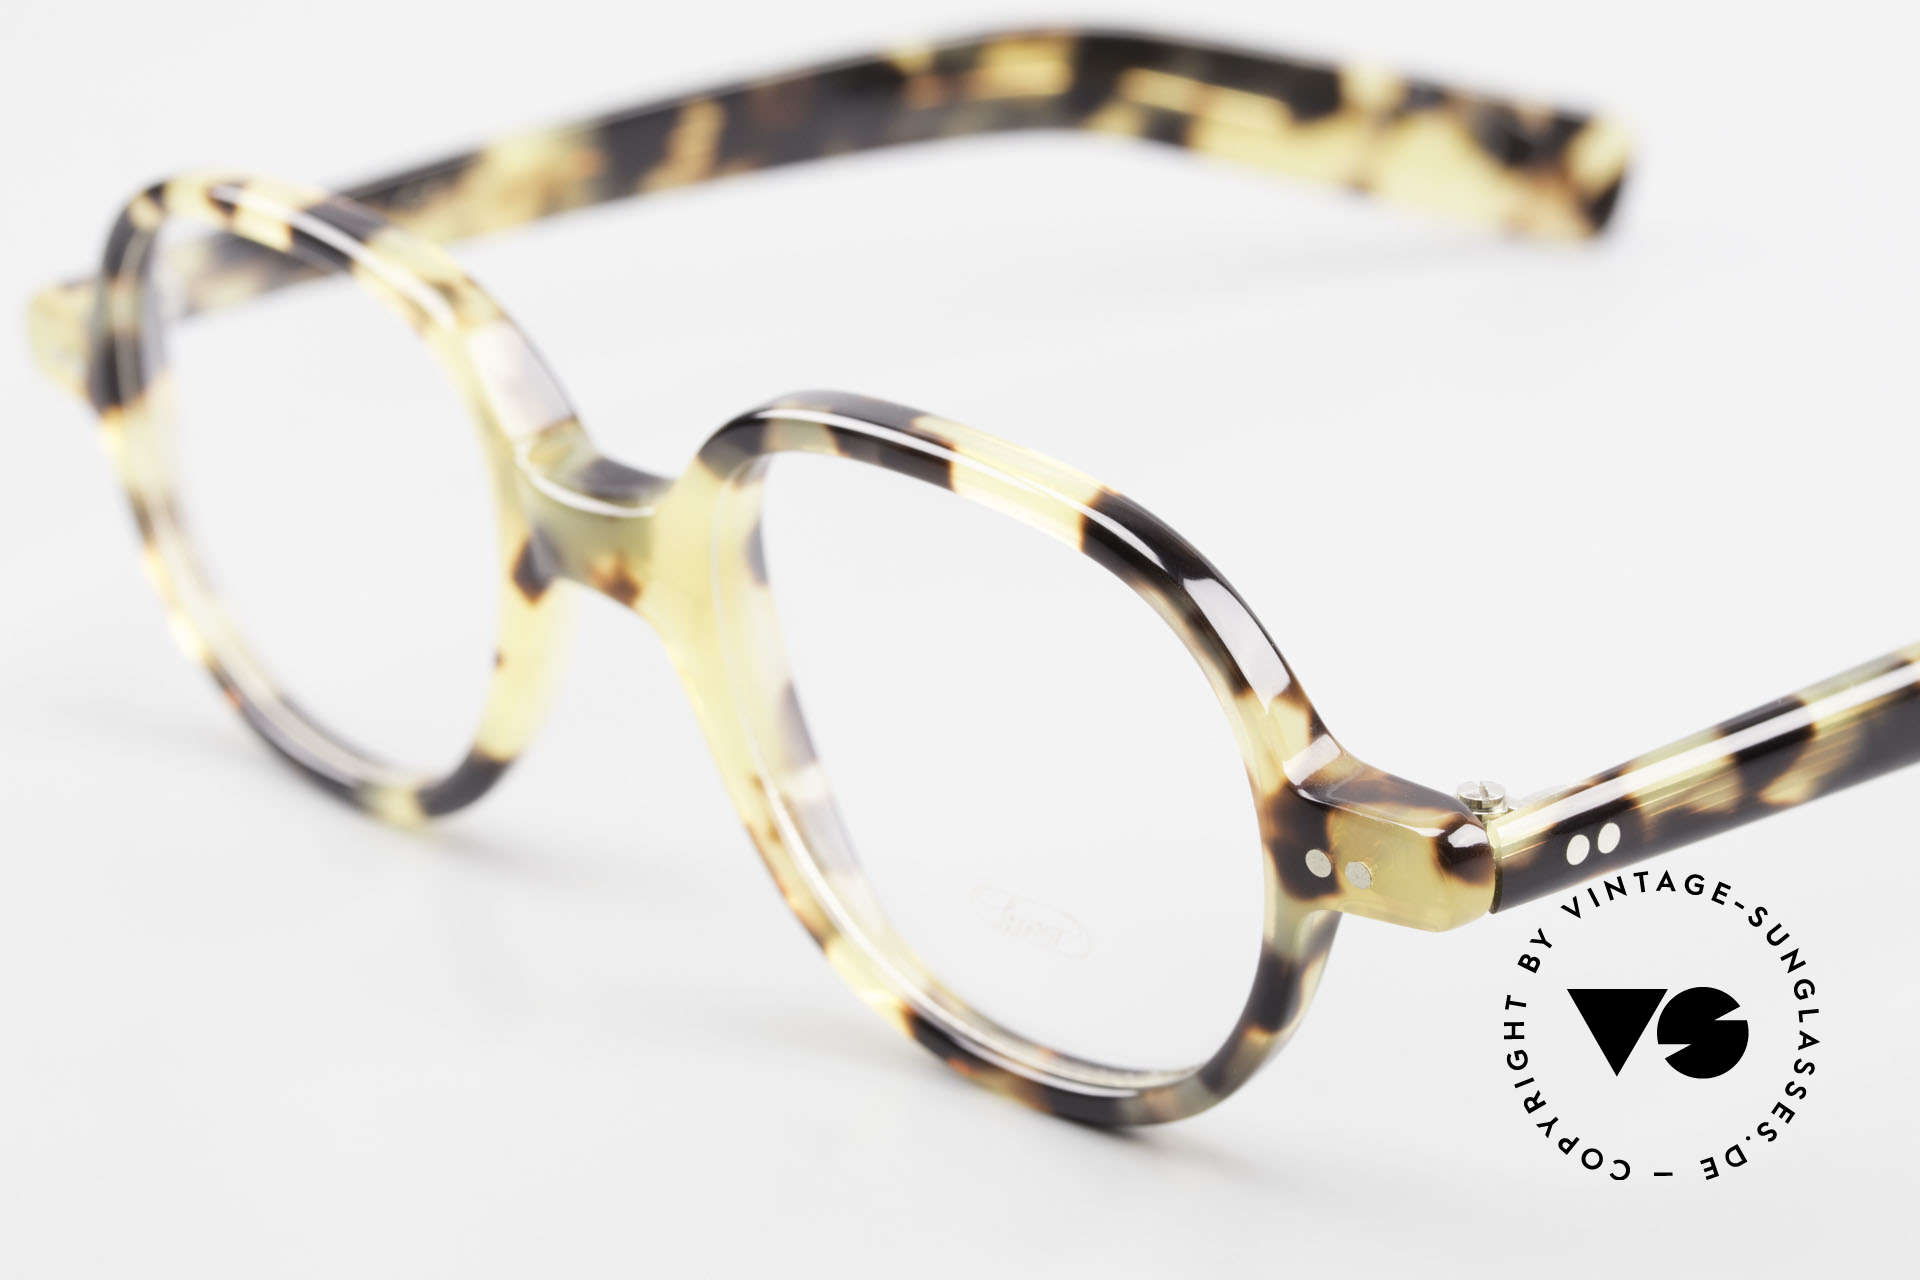 Lunor A50 Round Lunor Glasses Acetate, 100% made in Germany, hand-polished, a true CLASSIC, Made for Men and Women